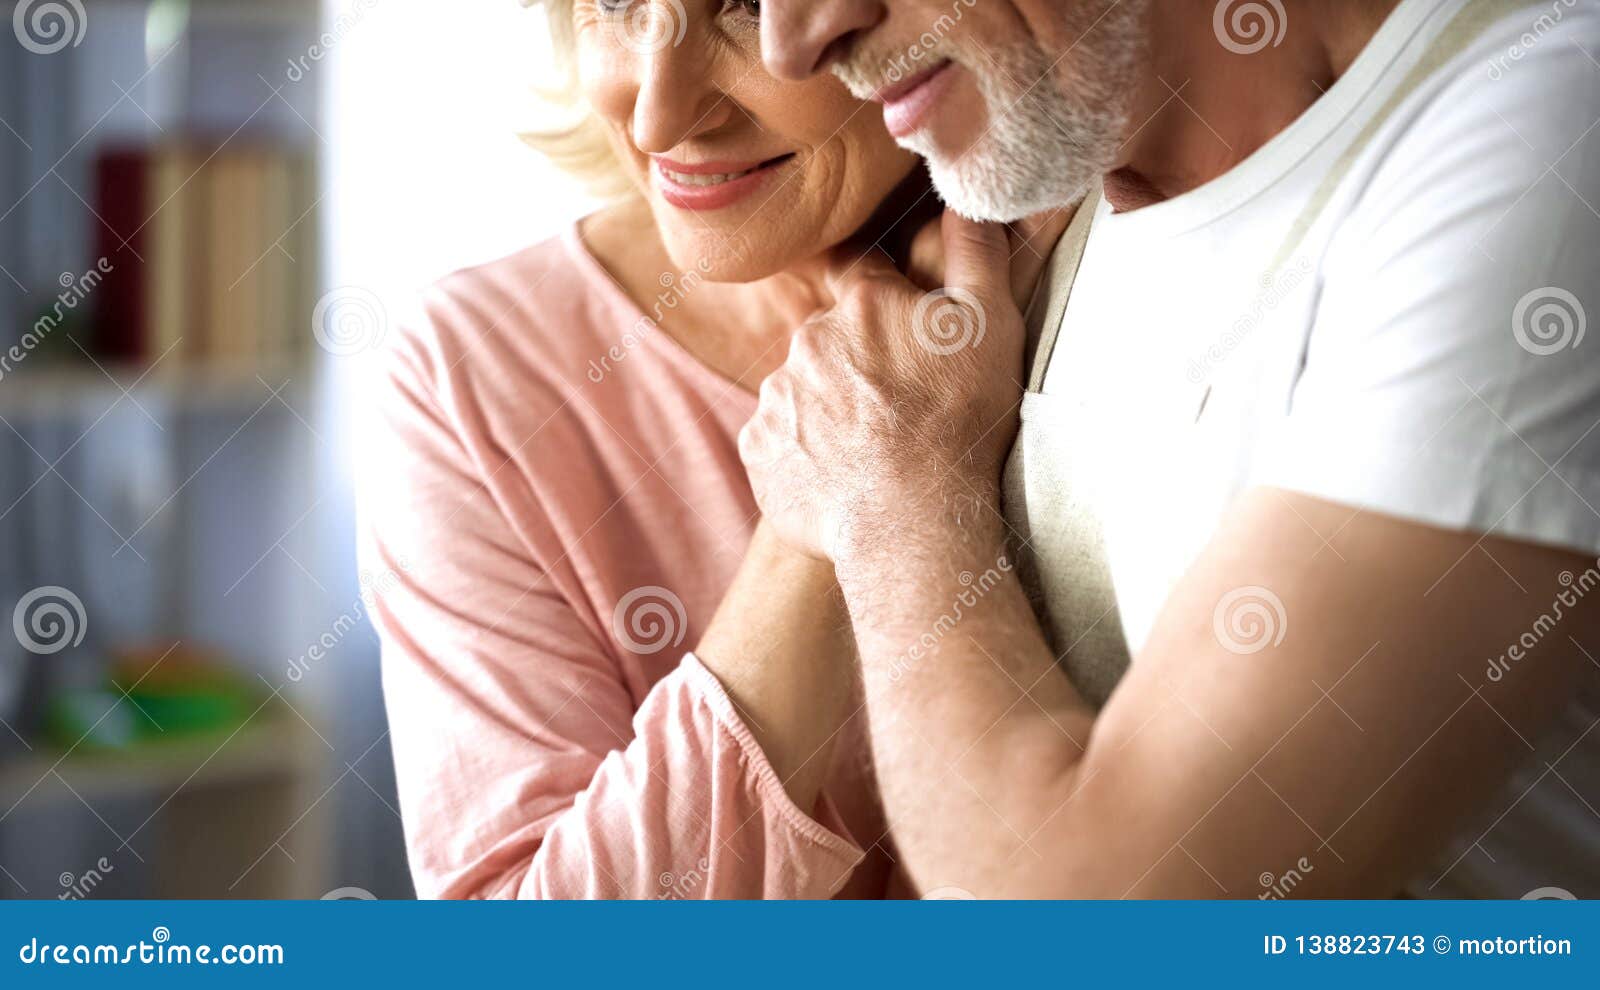 Happy Married Couple Holding Hands, Old Age Togetherness, Love and Understanding Stock Image pic